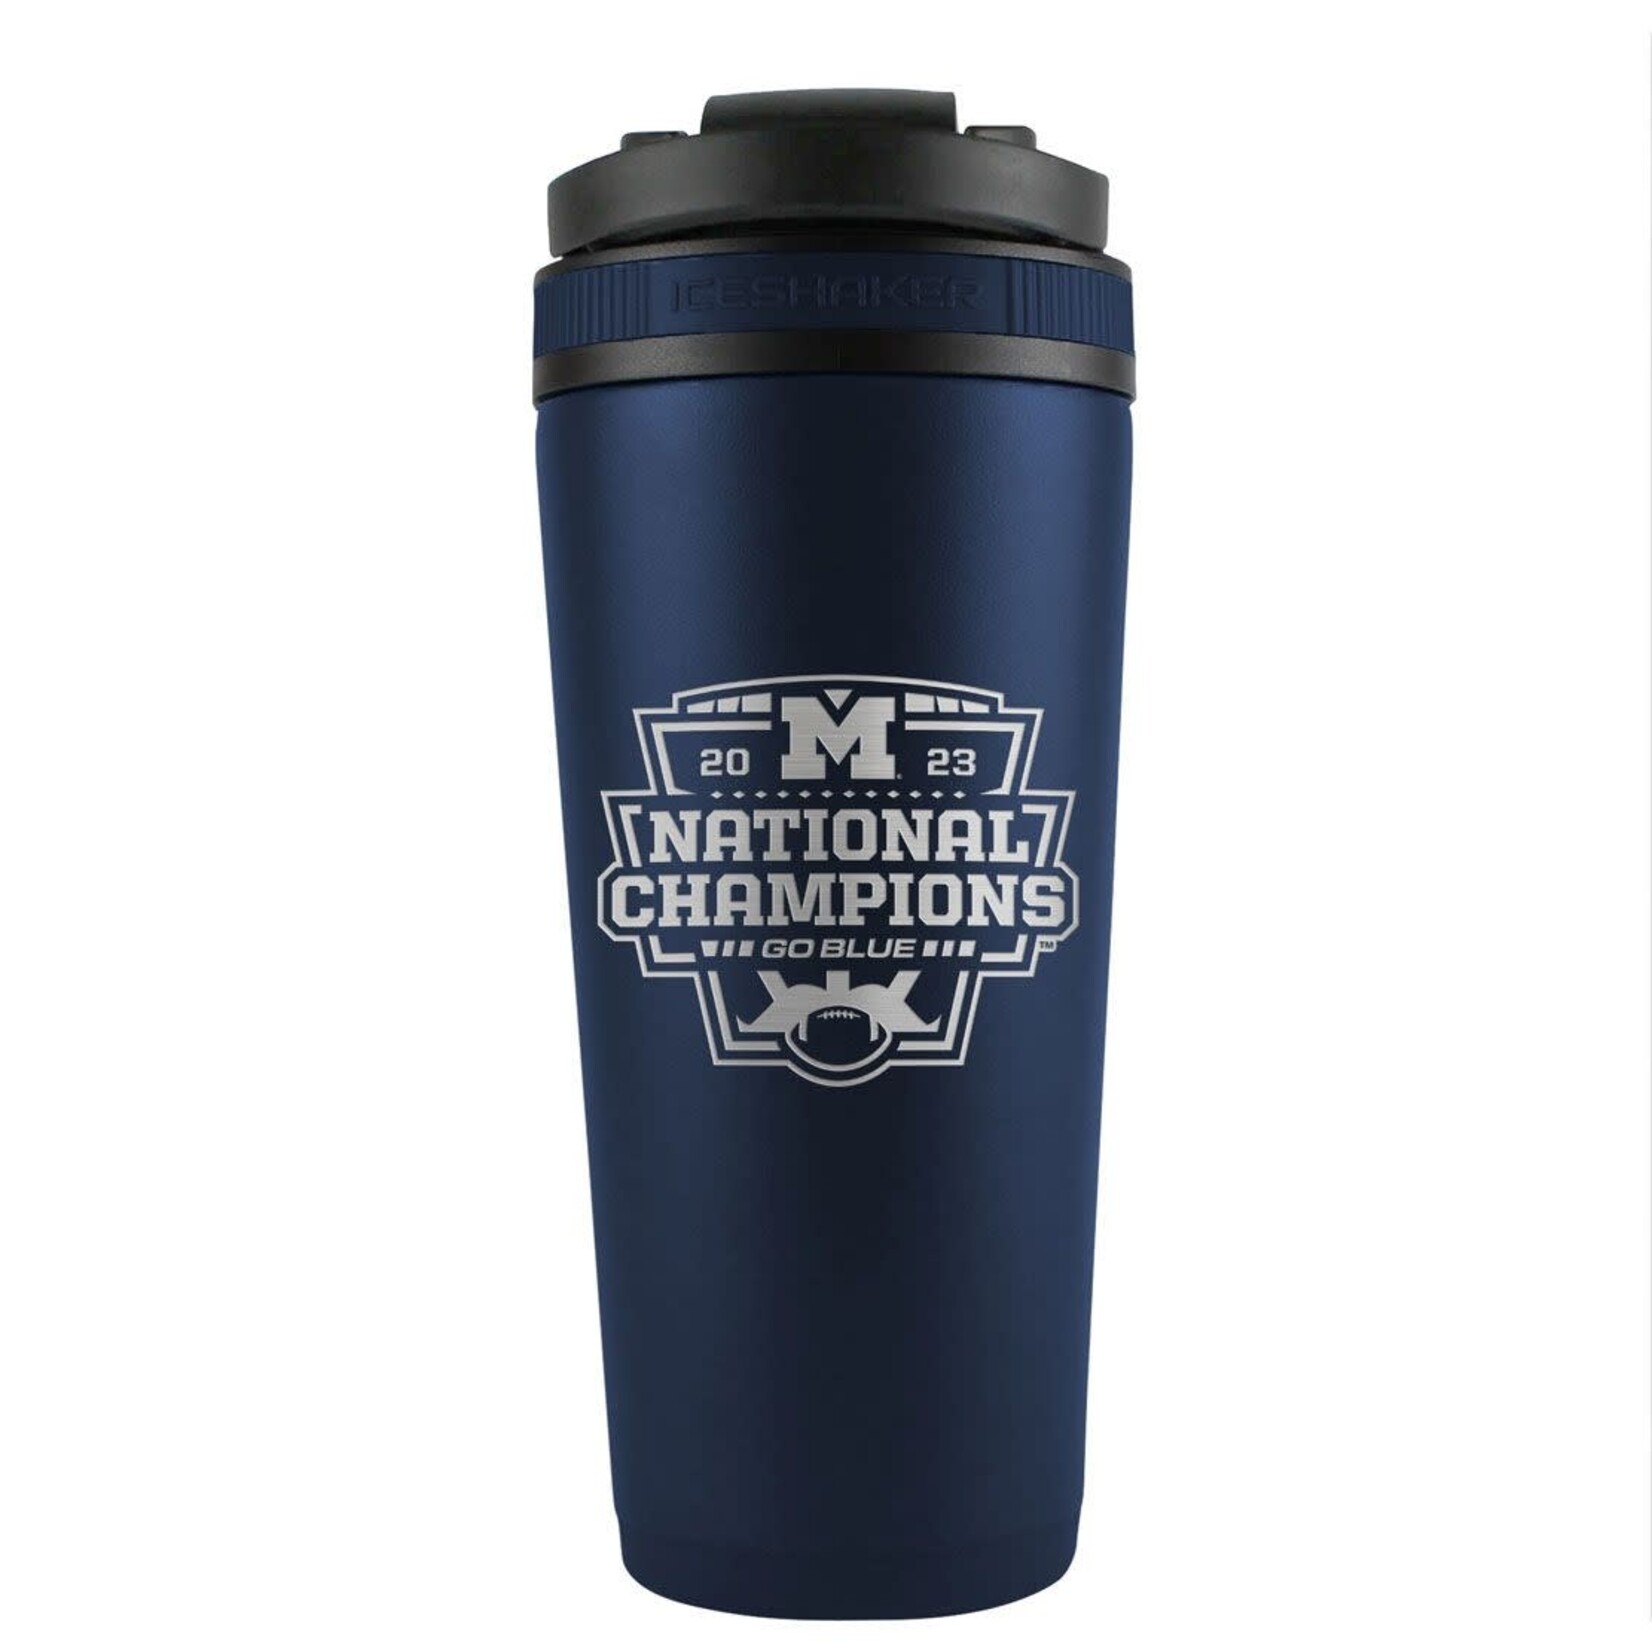 Ice Shaker Michigan Wolverines College Football Playoff 2023 National Champions 26oz. Ice Shaker Bottle